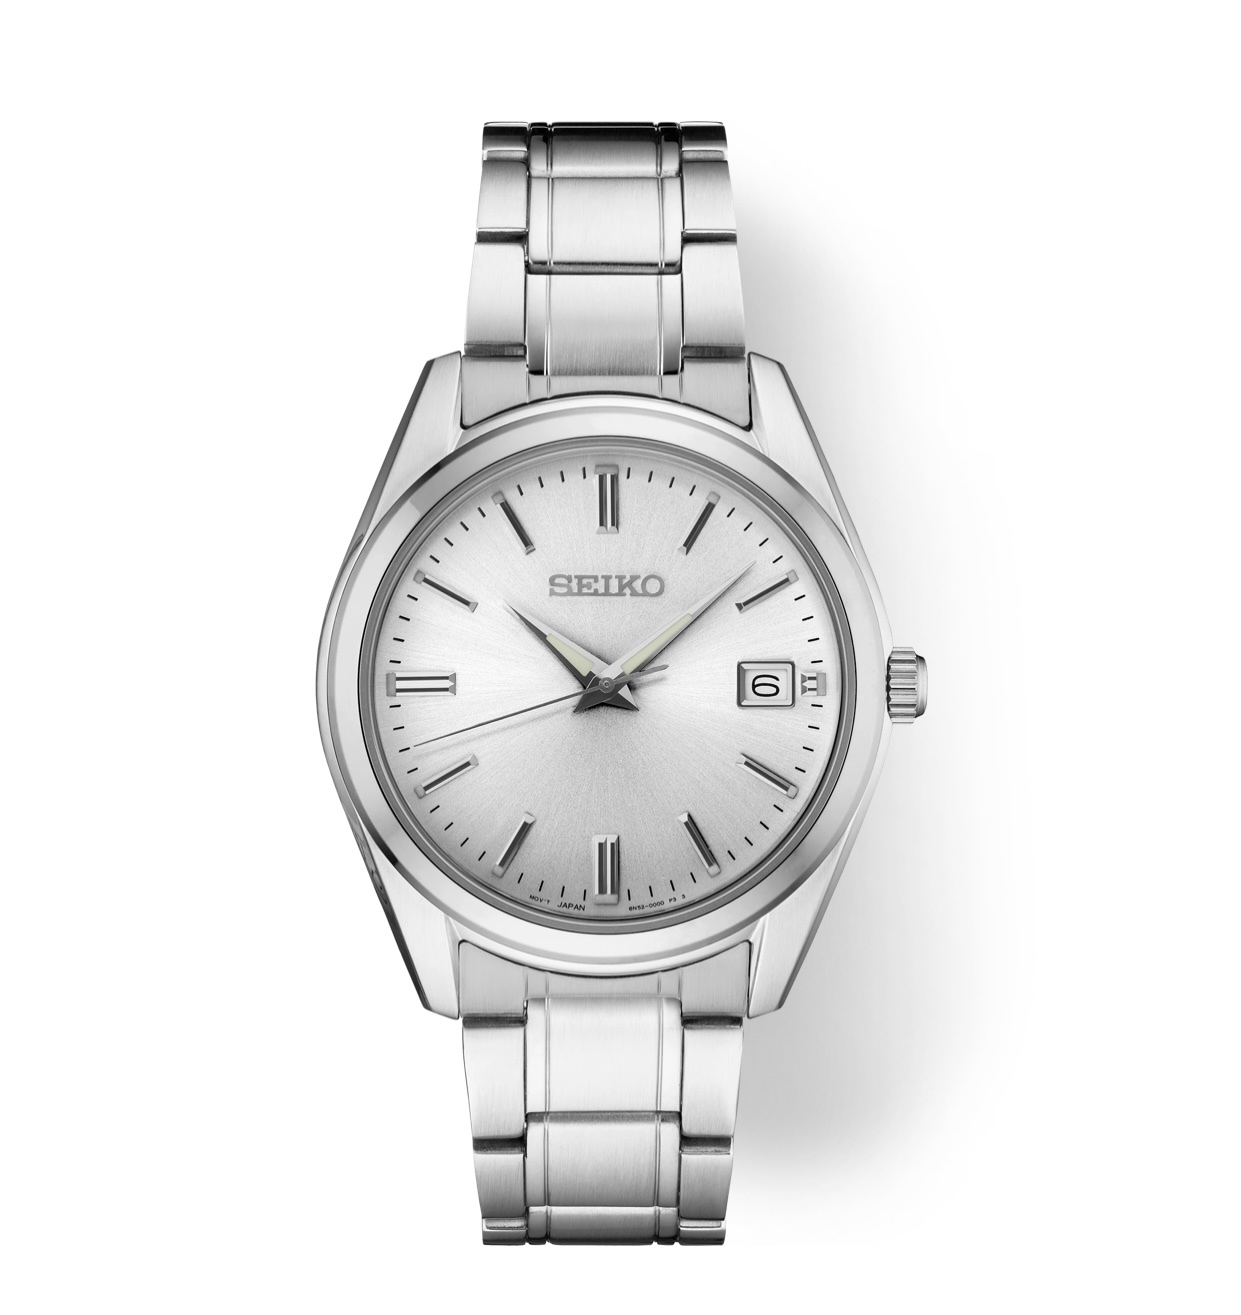 15 Best Seiko Watches Under 500 • The Slender Wrist-cokhiquangminh.vn